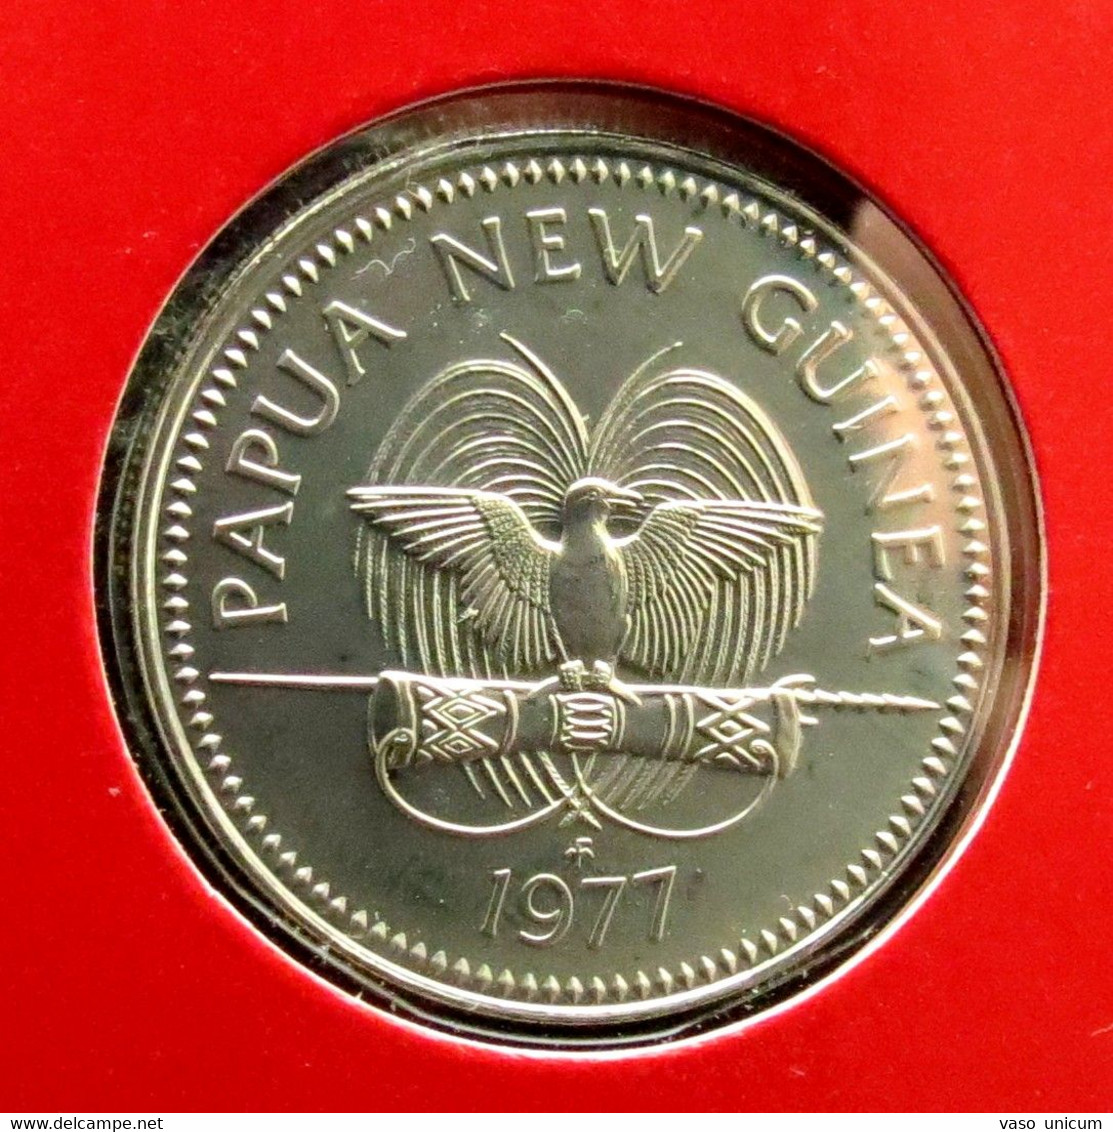 Papua New Guinea 10 Toea 1977 UNC - Minted 603 Coins Only - Papua New Guinea